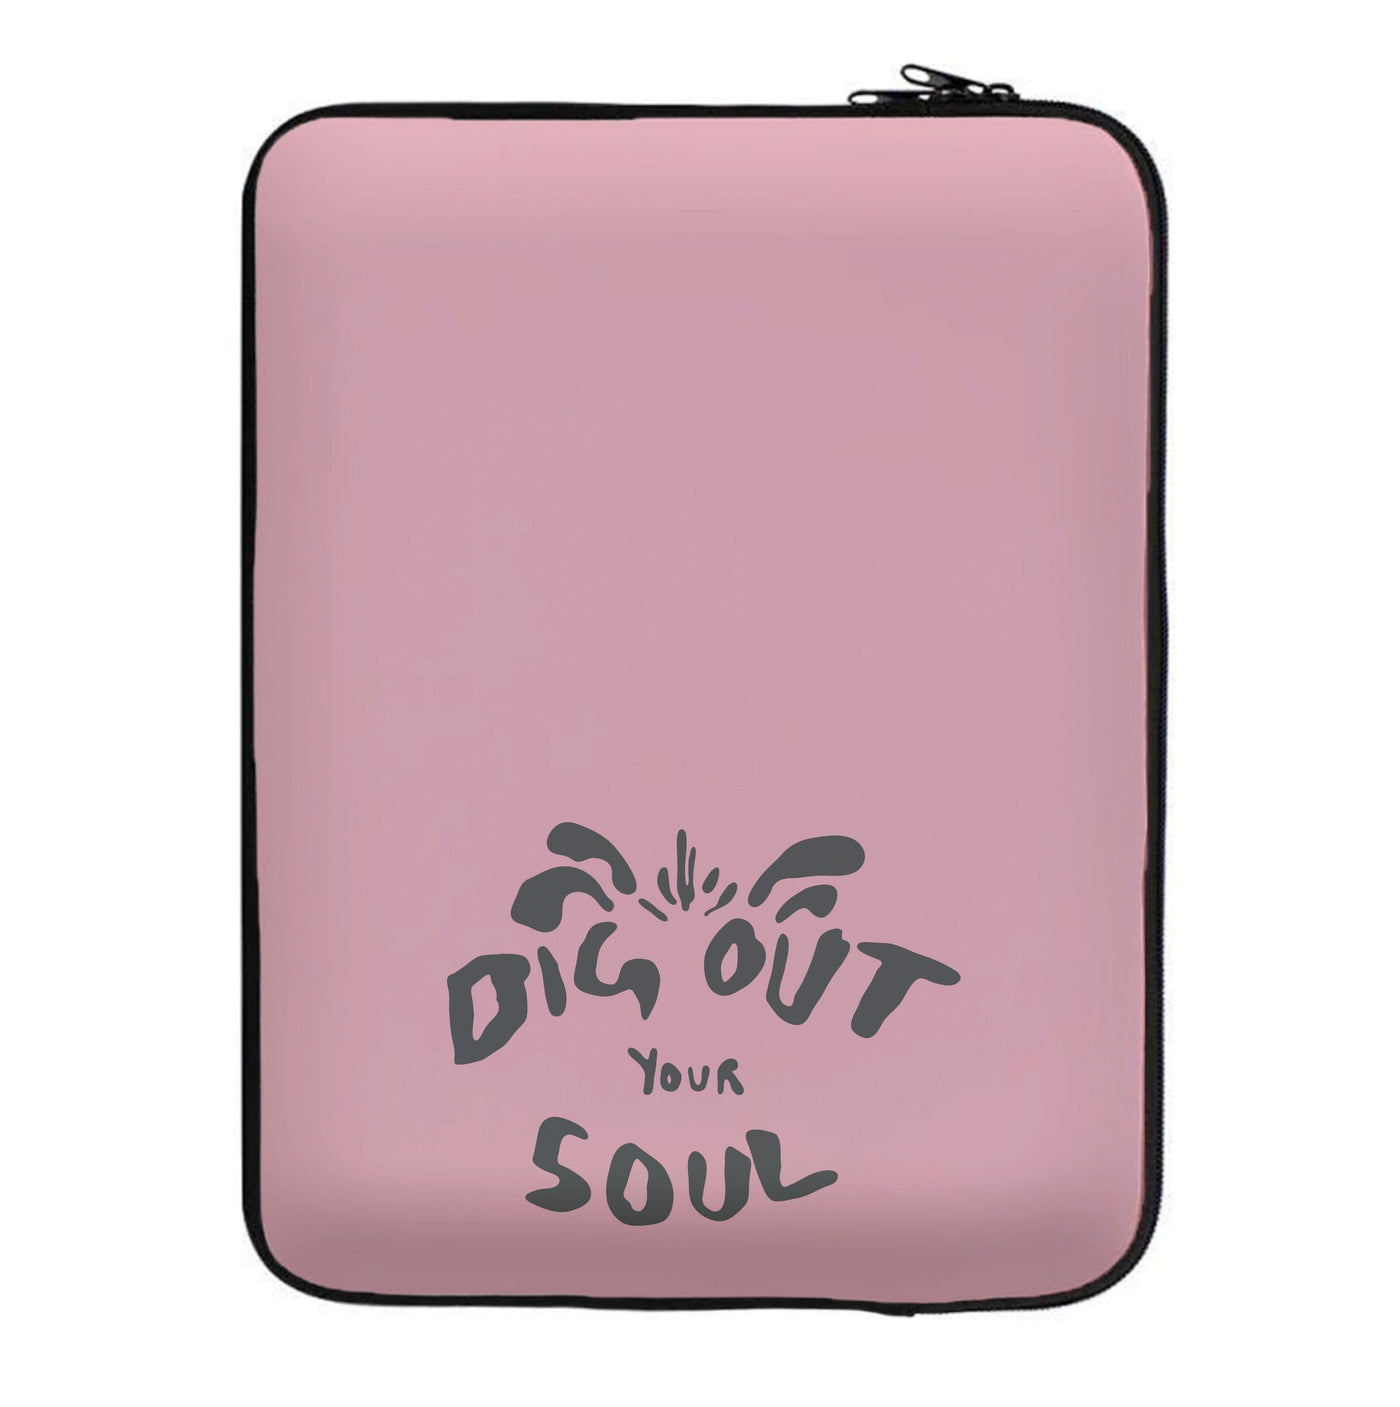 Dig Out Your Soul - Oasis Laptop Sleeve